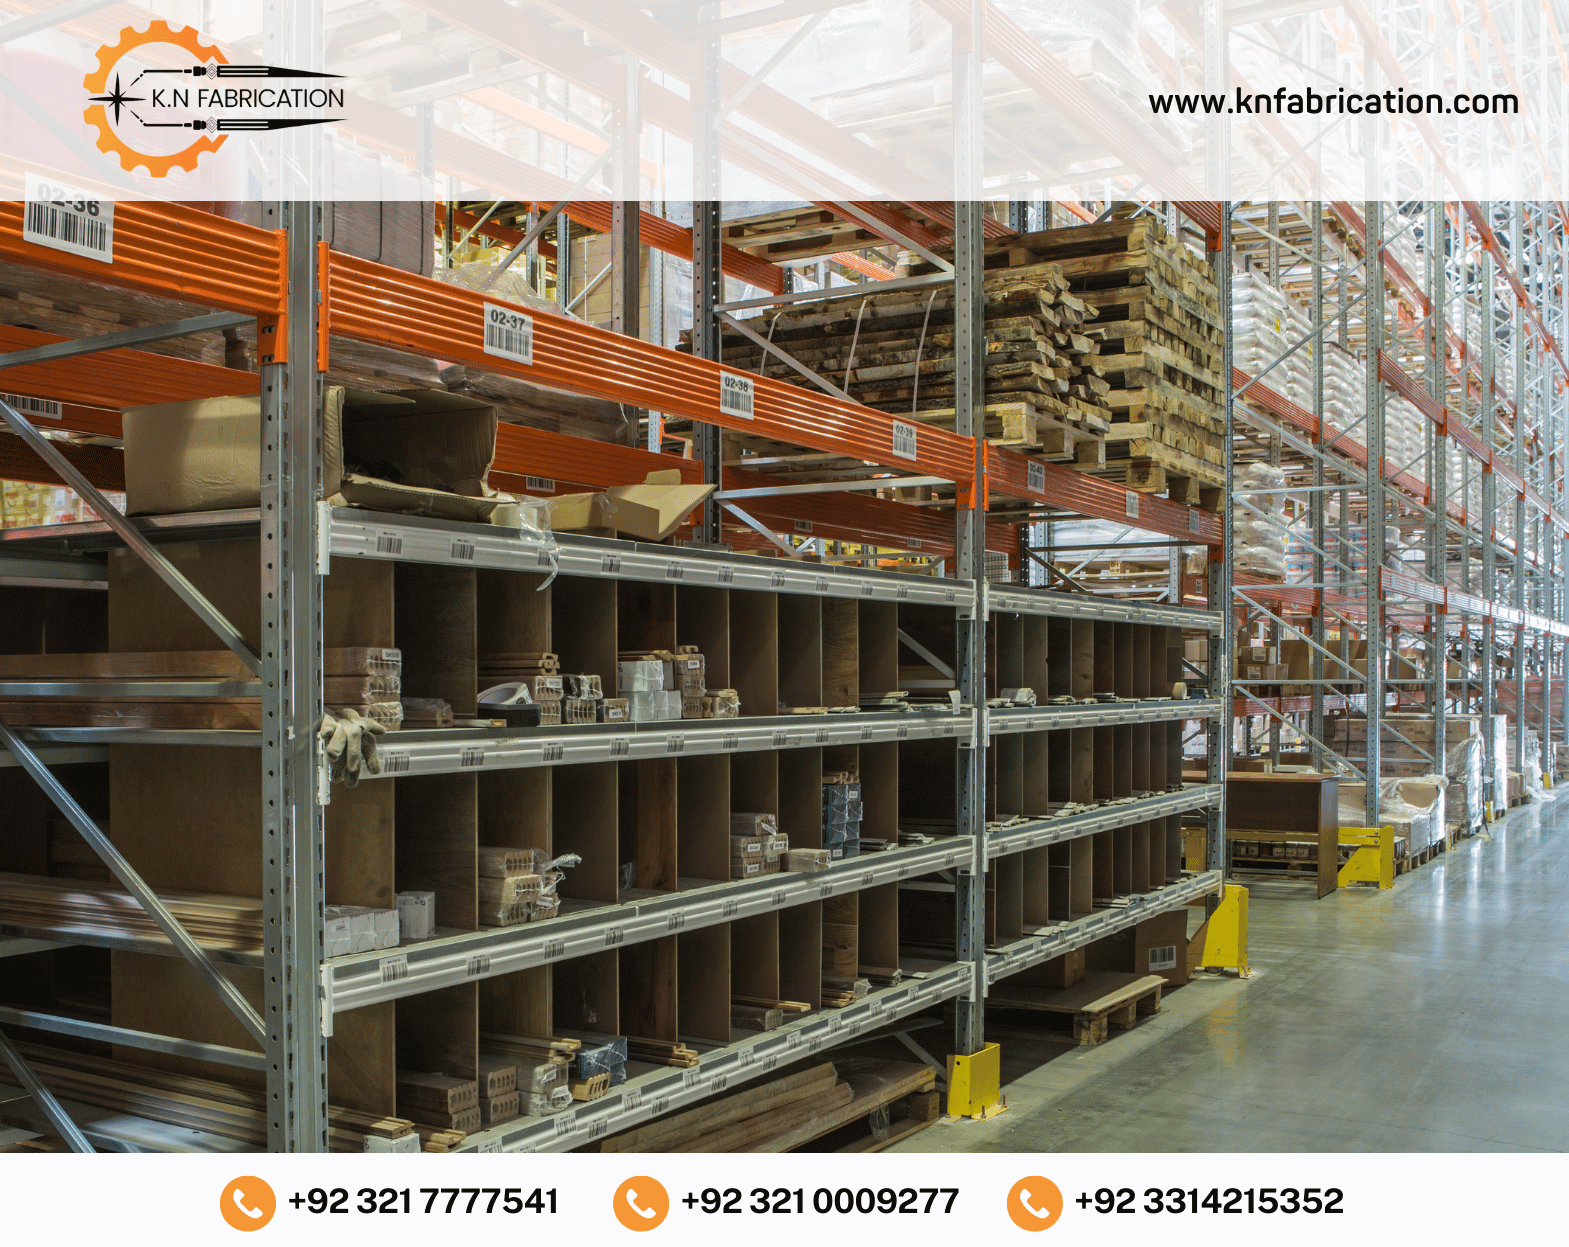 Heavyduty pallet racking system in a warehouse in Pakistan by KN Fabrication